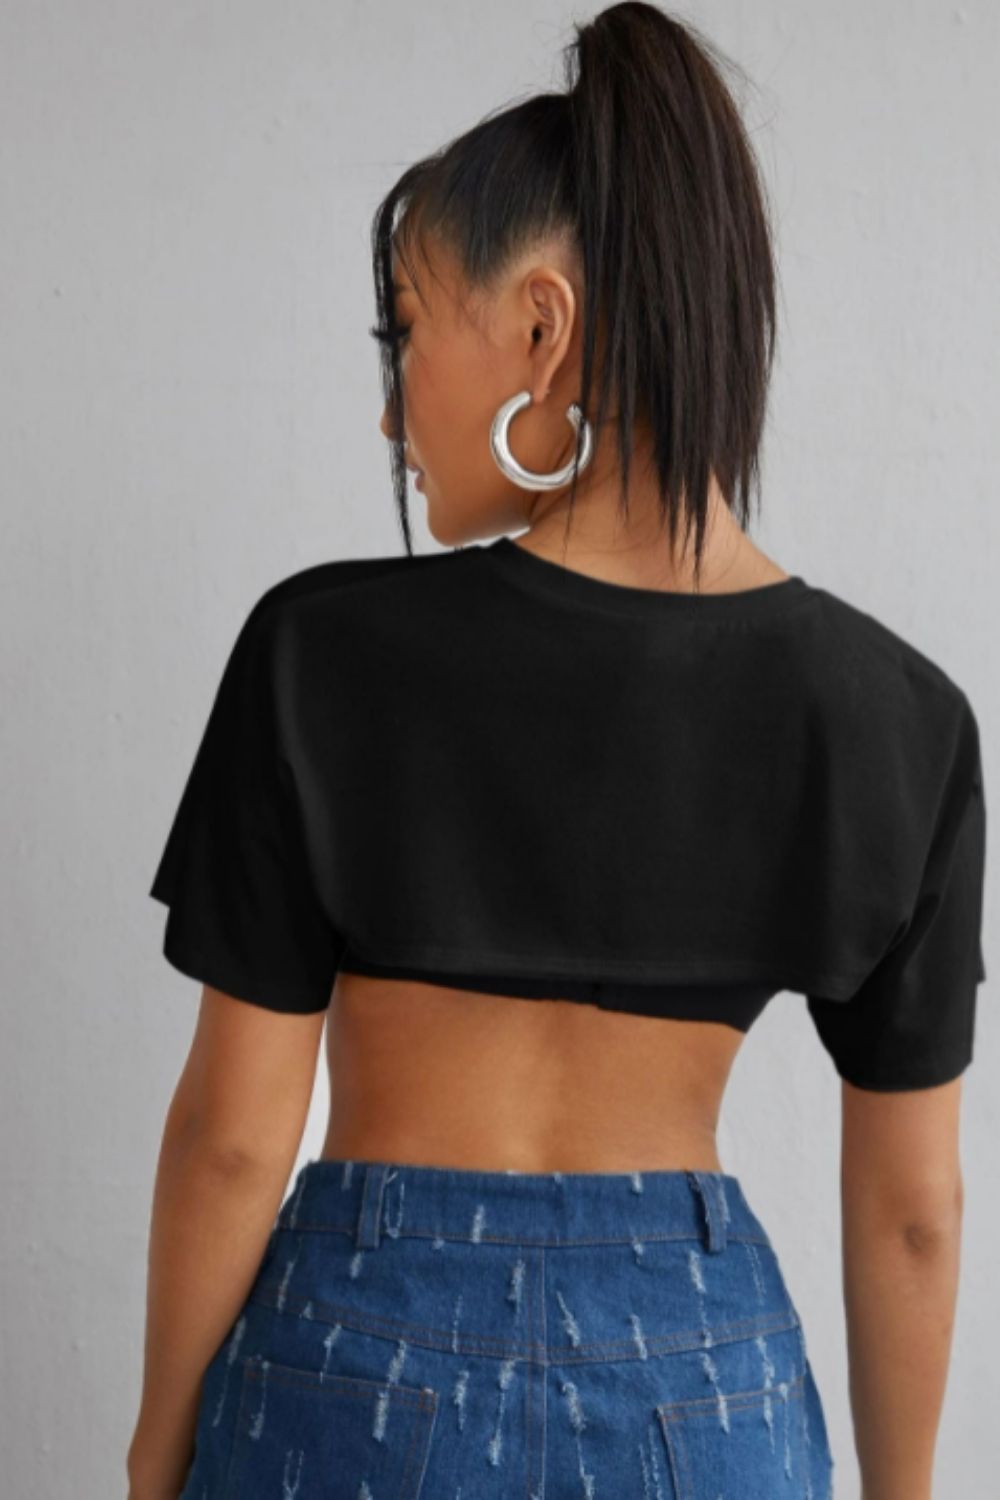 Boxy super crop top without bra